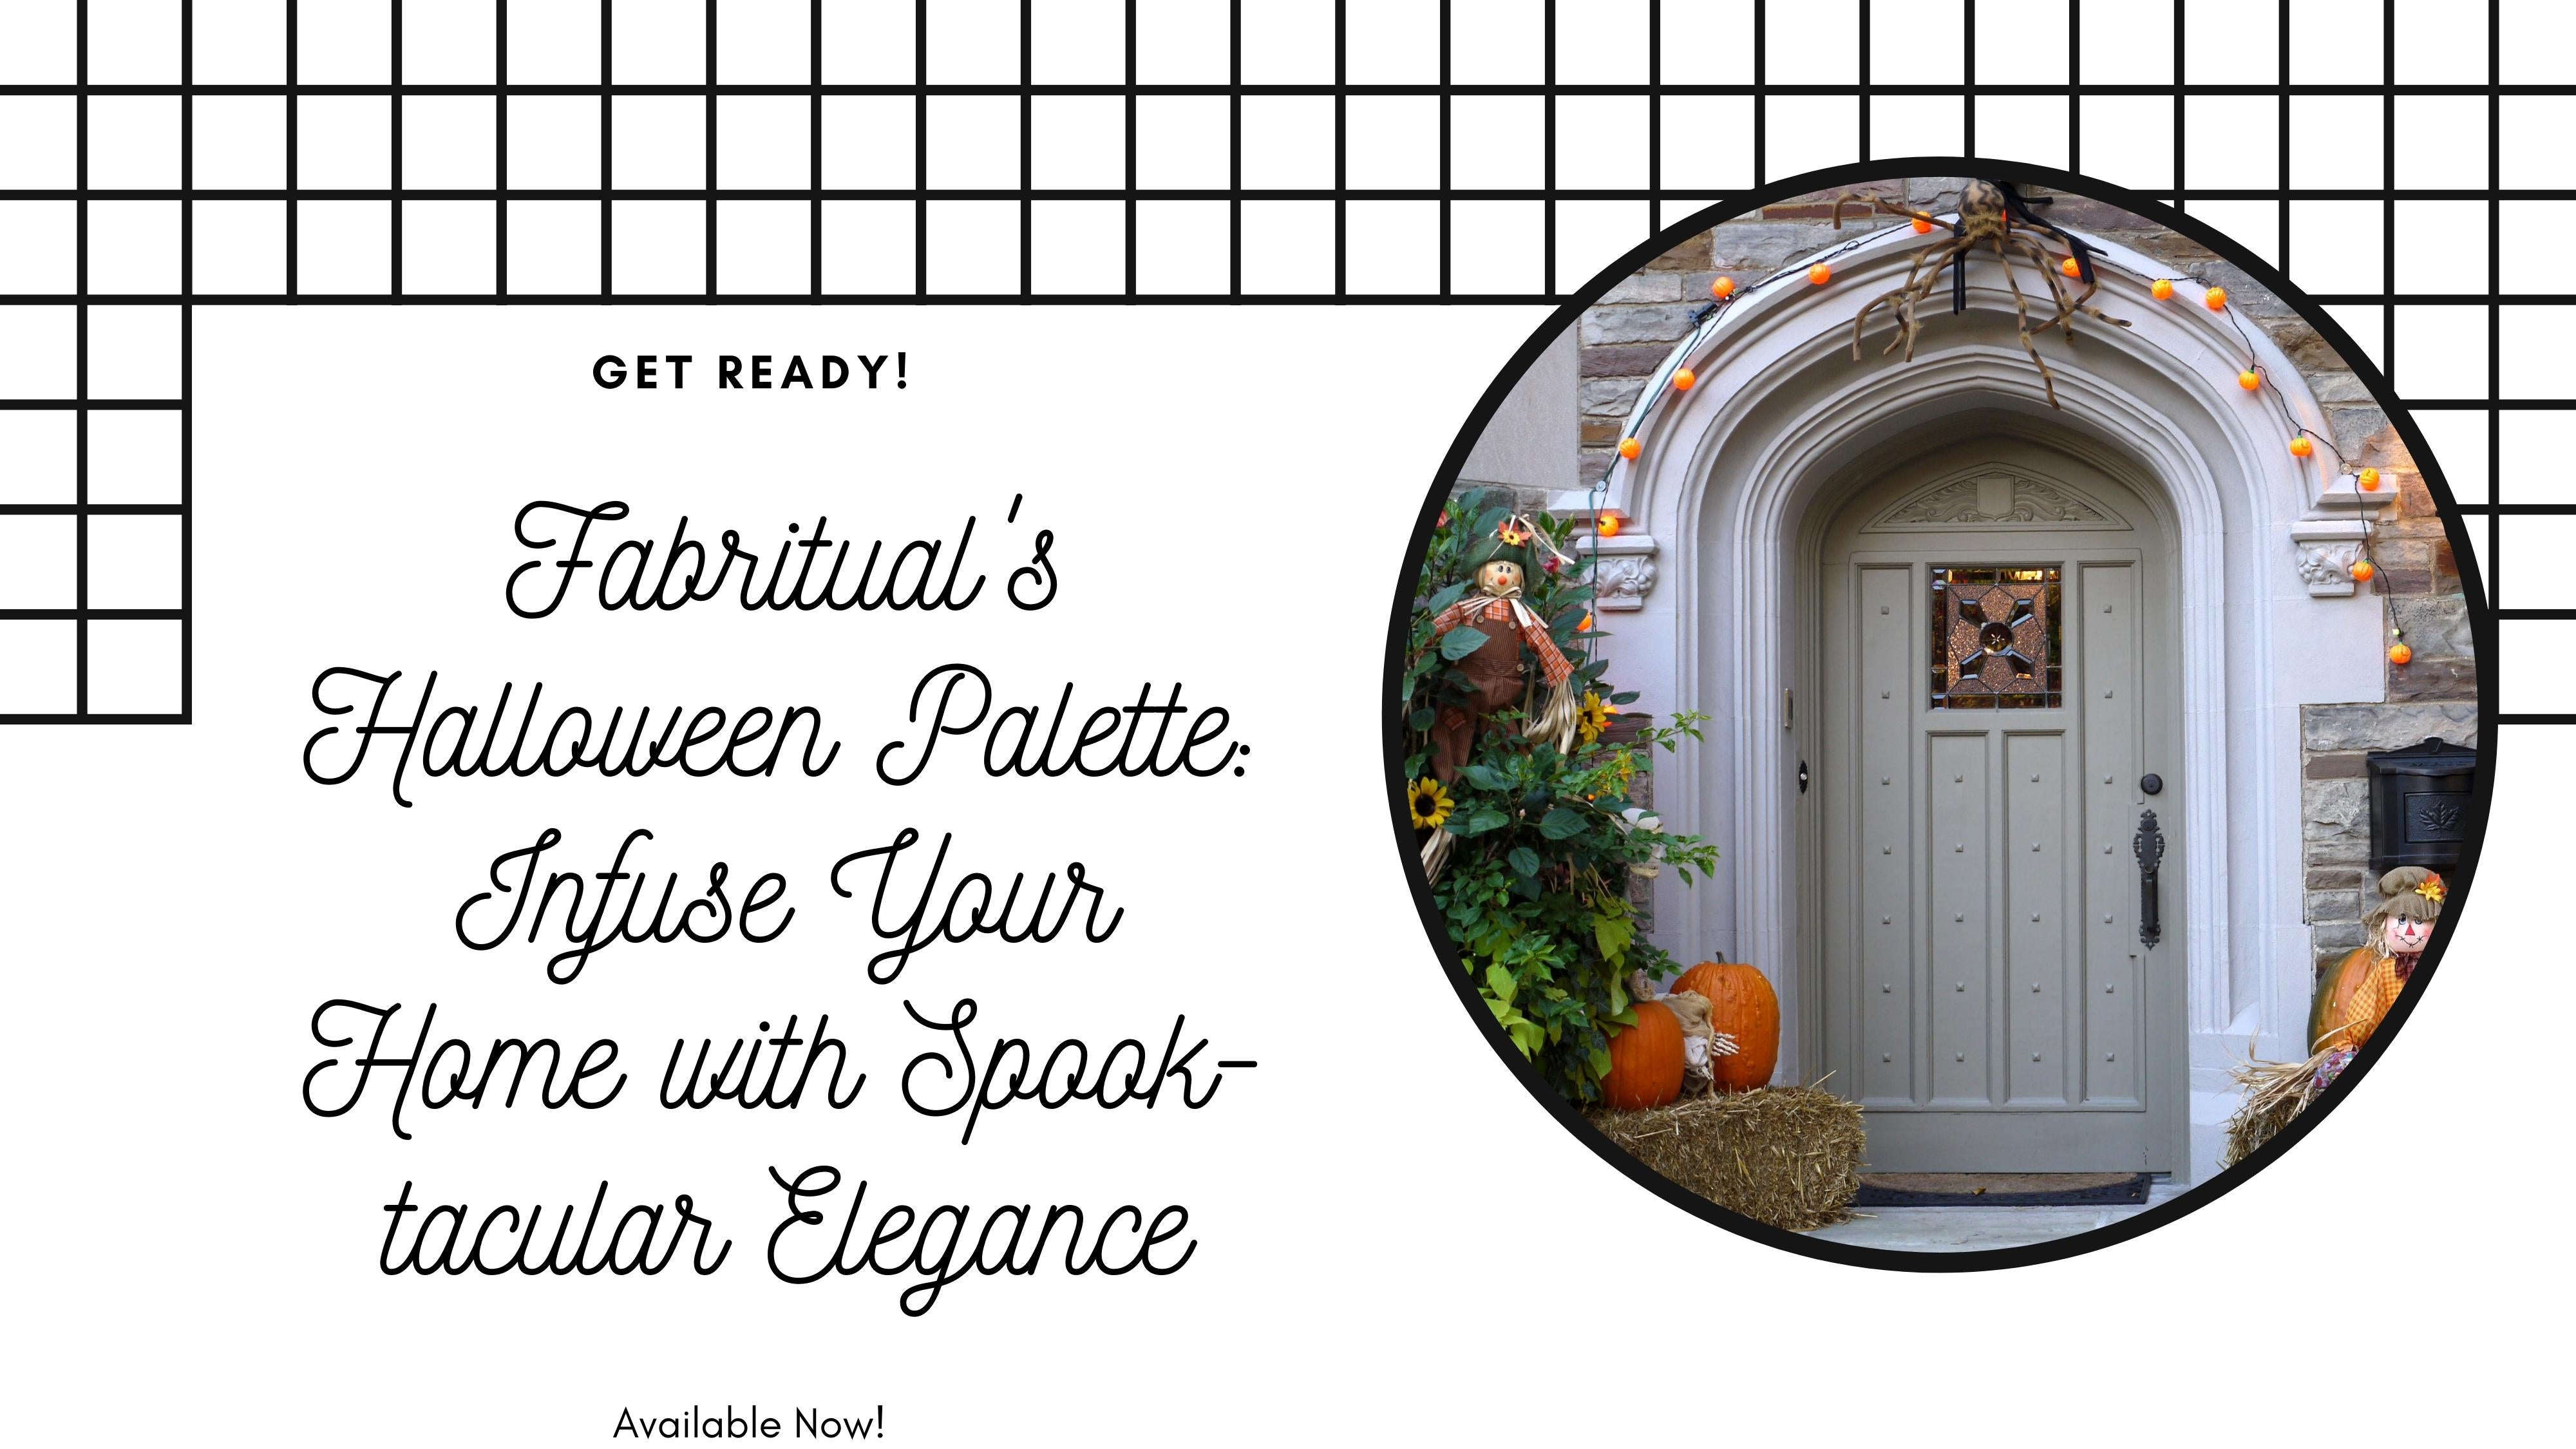 Fabritual's Halloween Palette: Infuse Your Home with Spook-tacular Elegance - Fabritual